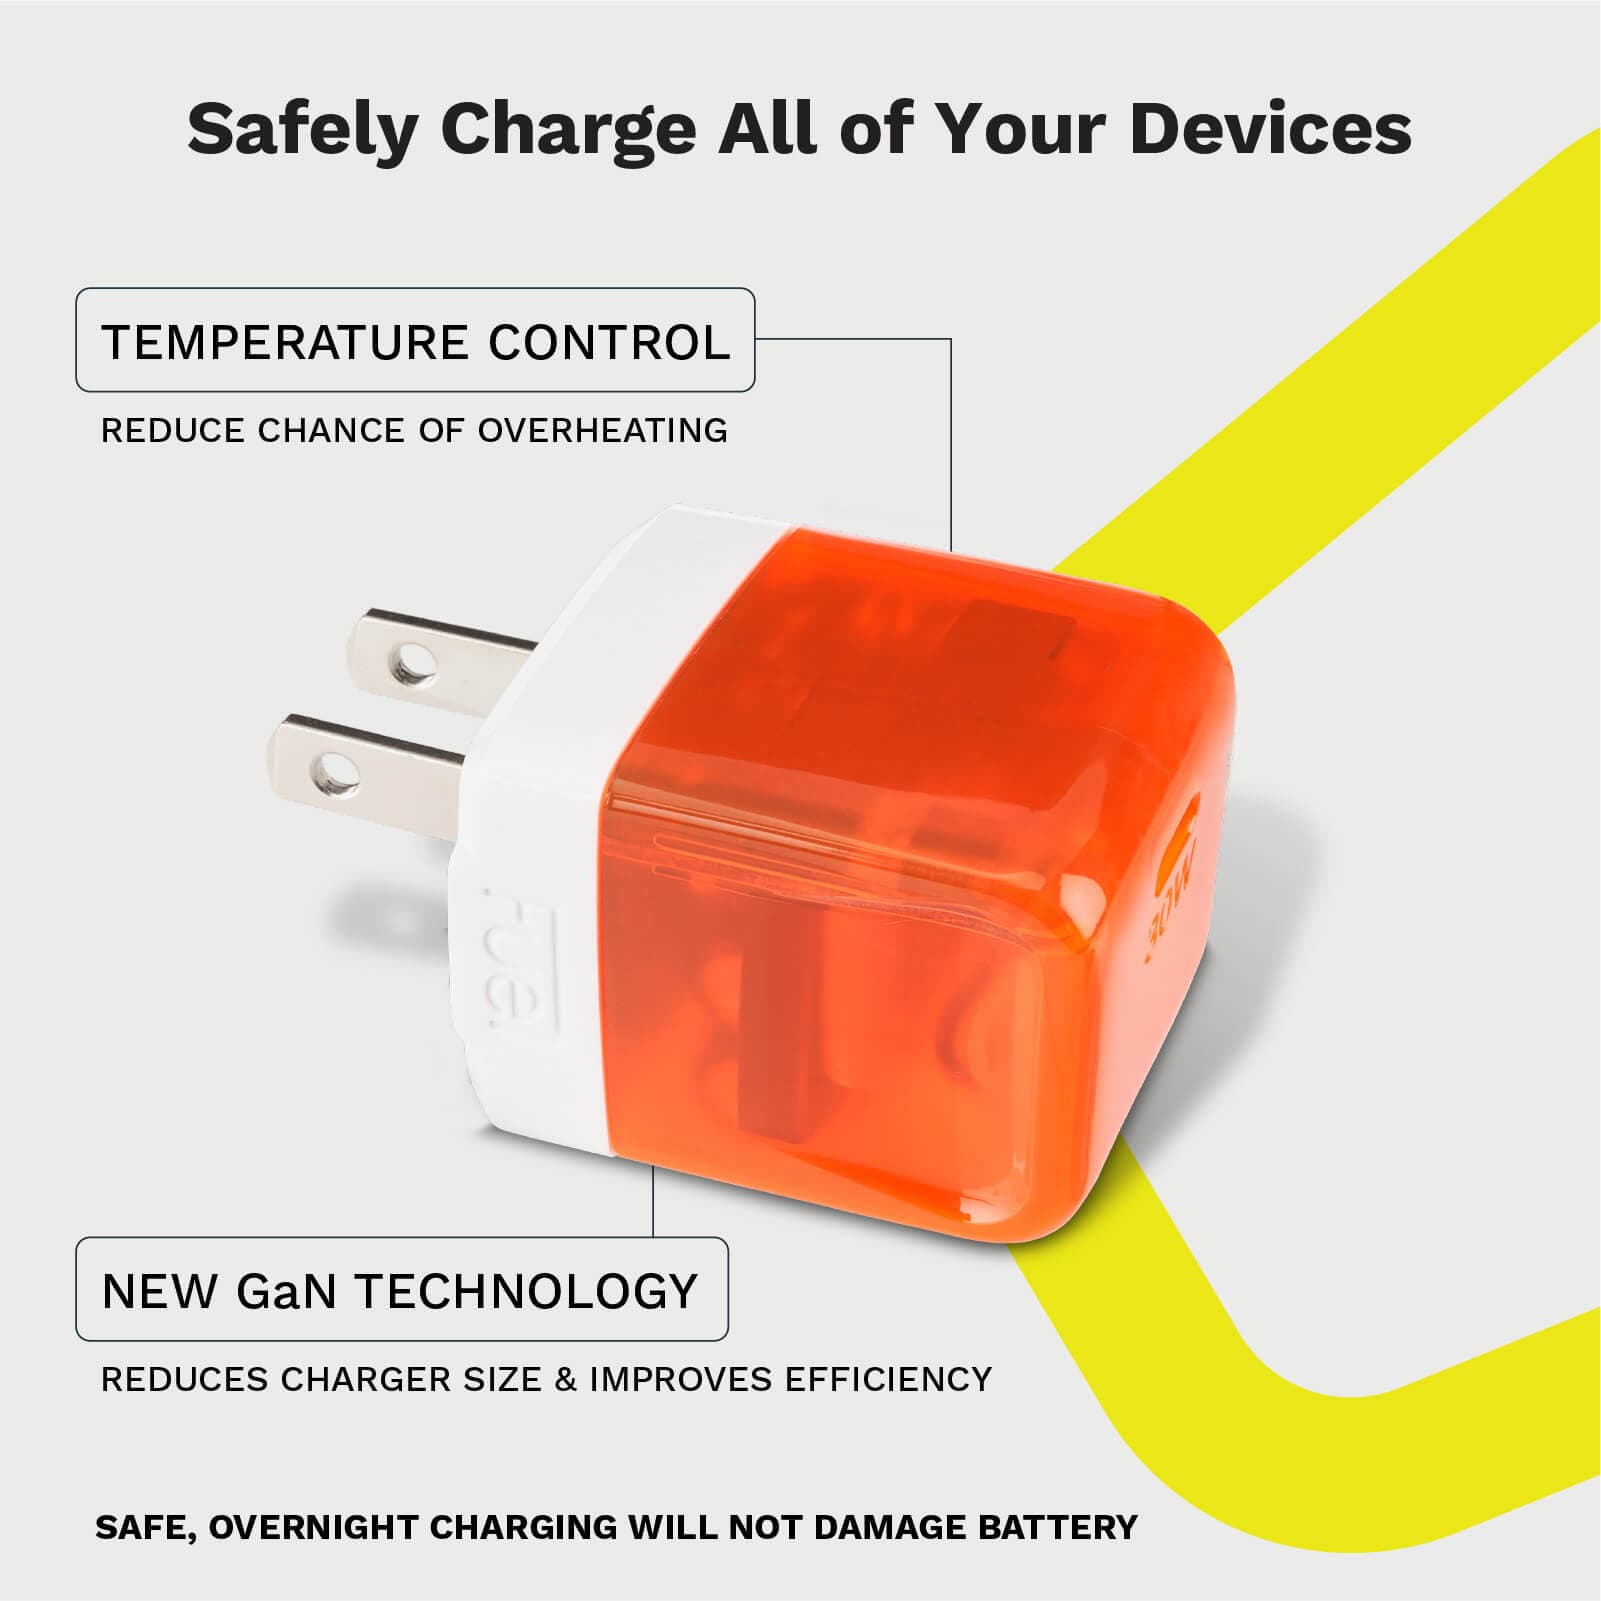 TEMPERATURE CONTROL REDUCE CHANCE OF OVERHEATING. NEW GaN TECHNOLOGY REDUCES CHARGER SIZE AND IMPROVES EFFICIENCY. SAFE, OVERNIGHT CHARGING WILL NOT DAMAGE BATTERY. Color::Vibrant Orange